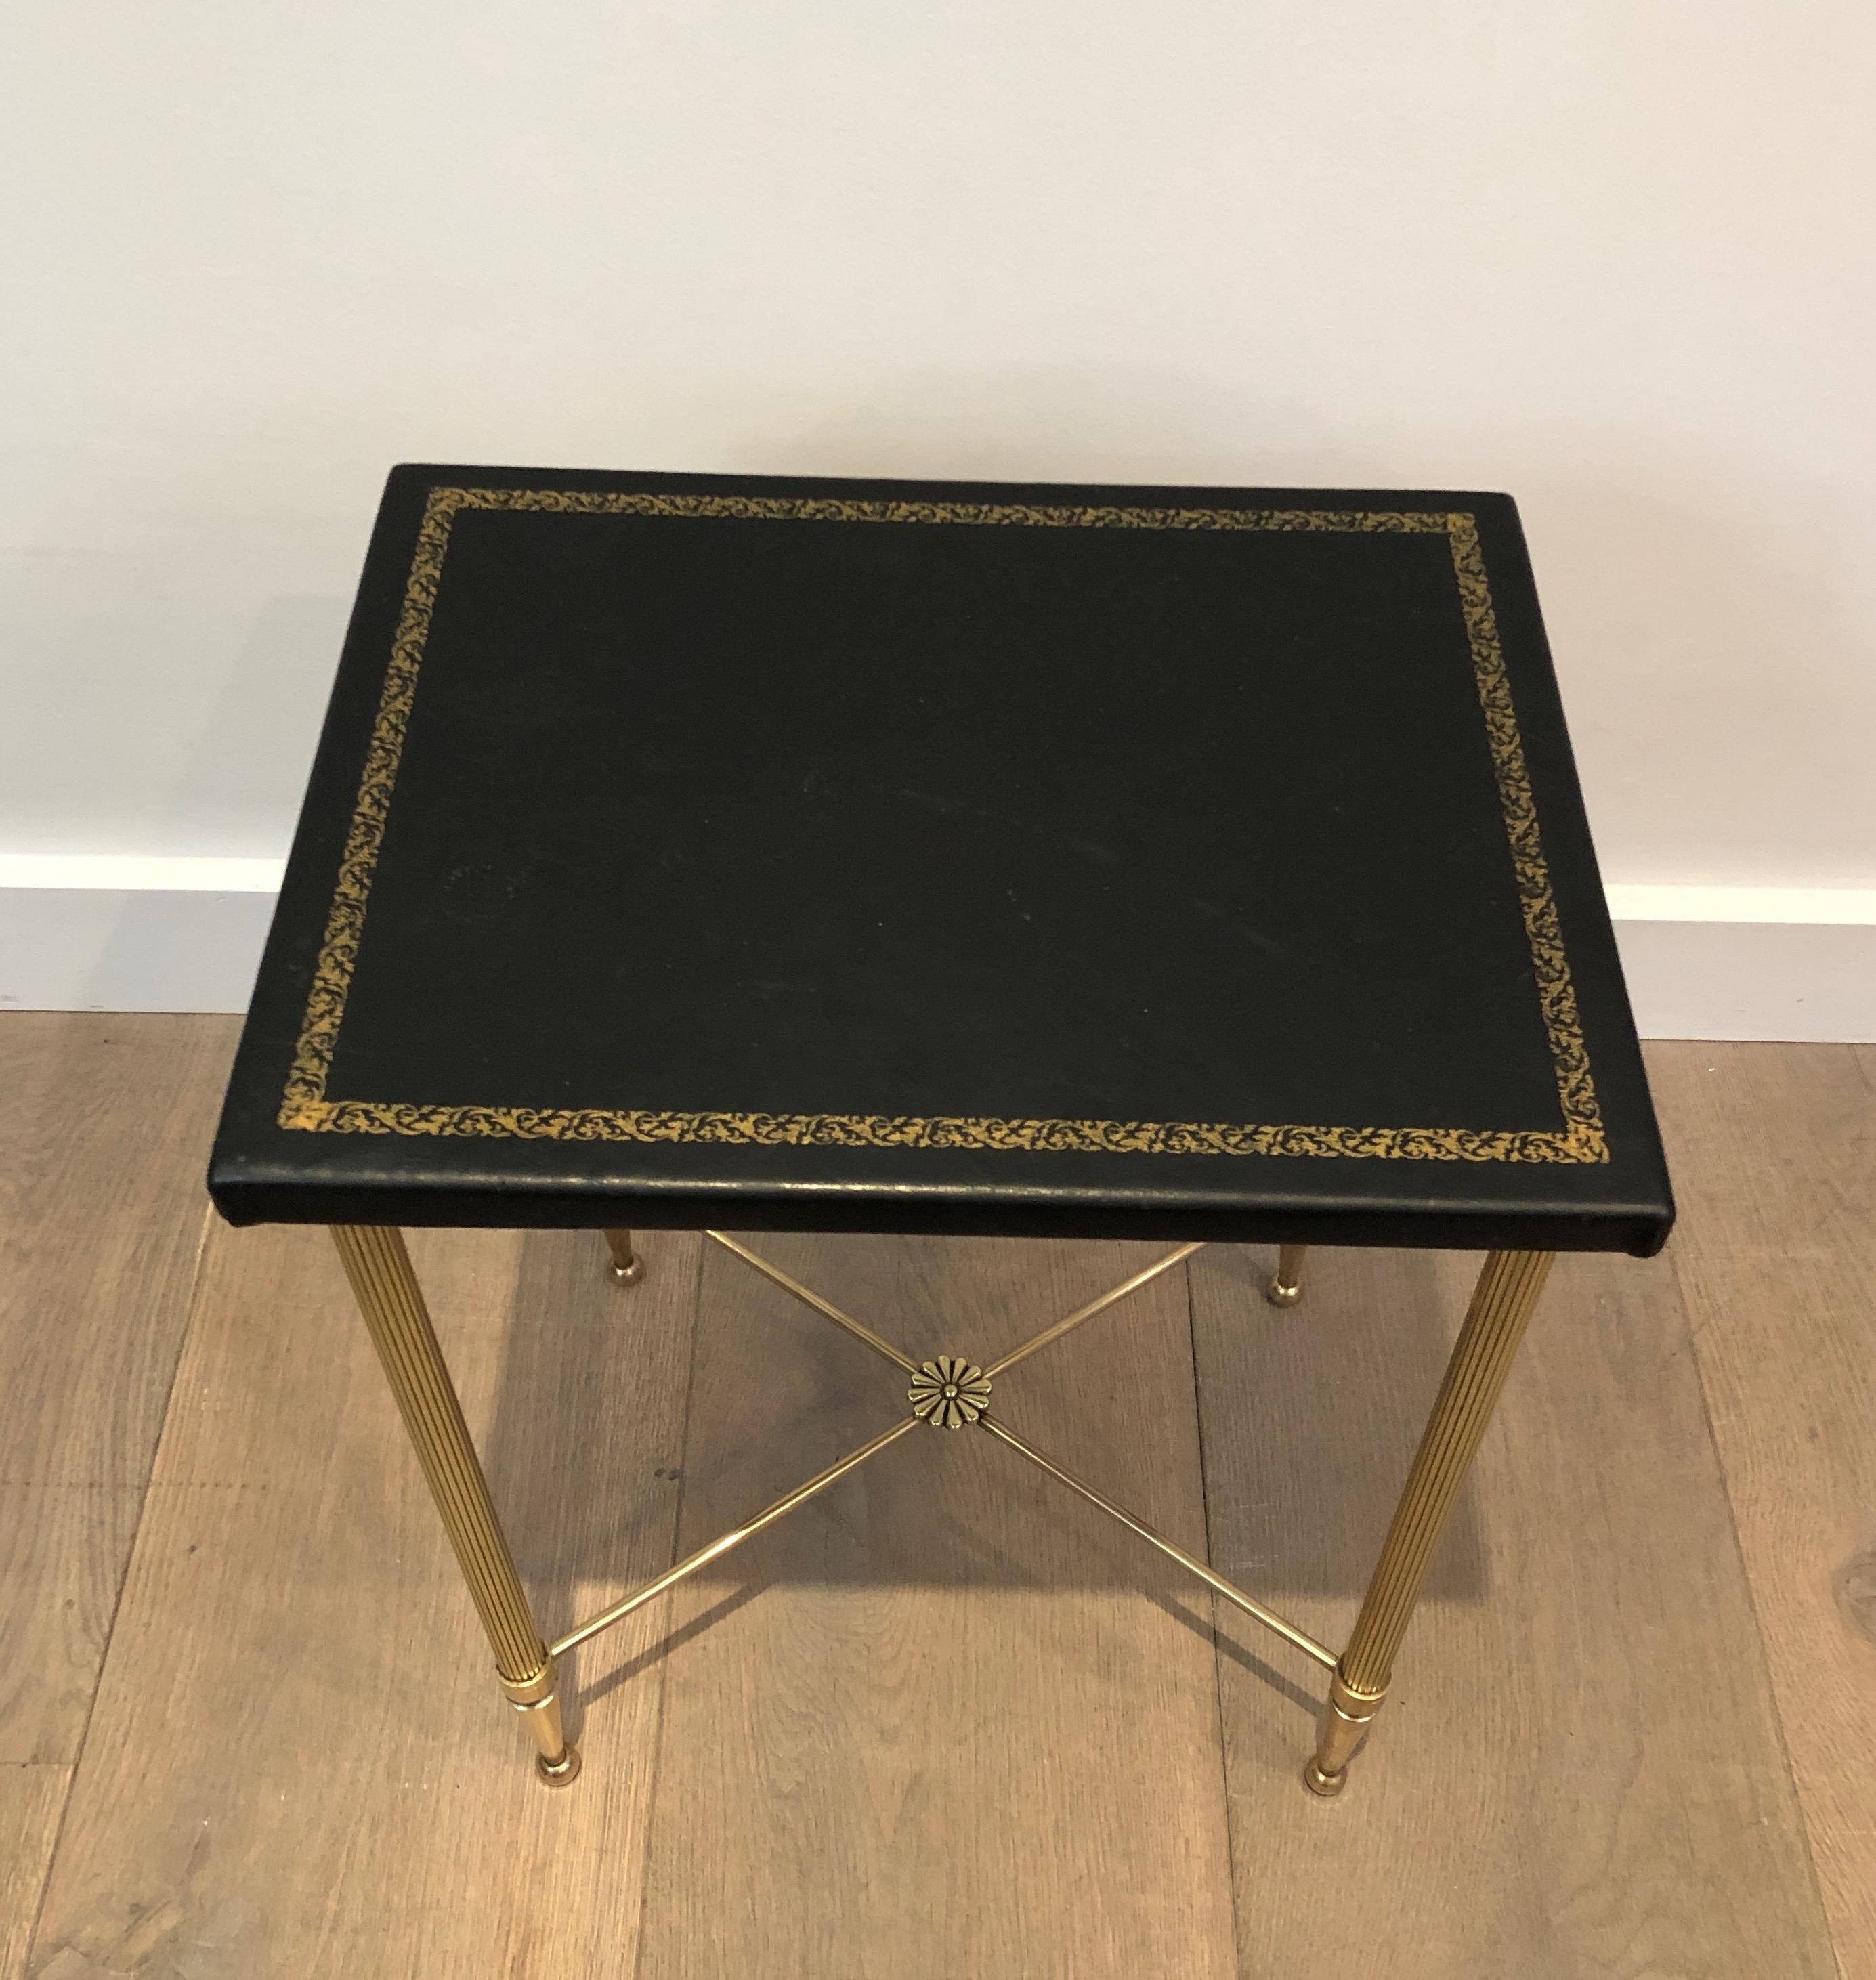 This small side table is made of brass and gold-trimmed leather. This is a French work, in the style of Maison Jansen, circa 1940.